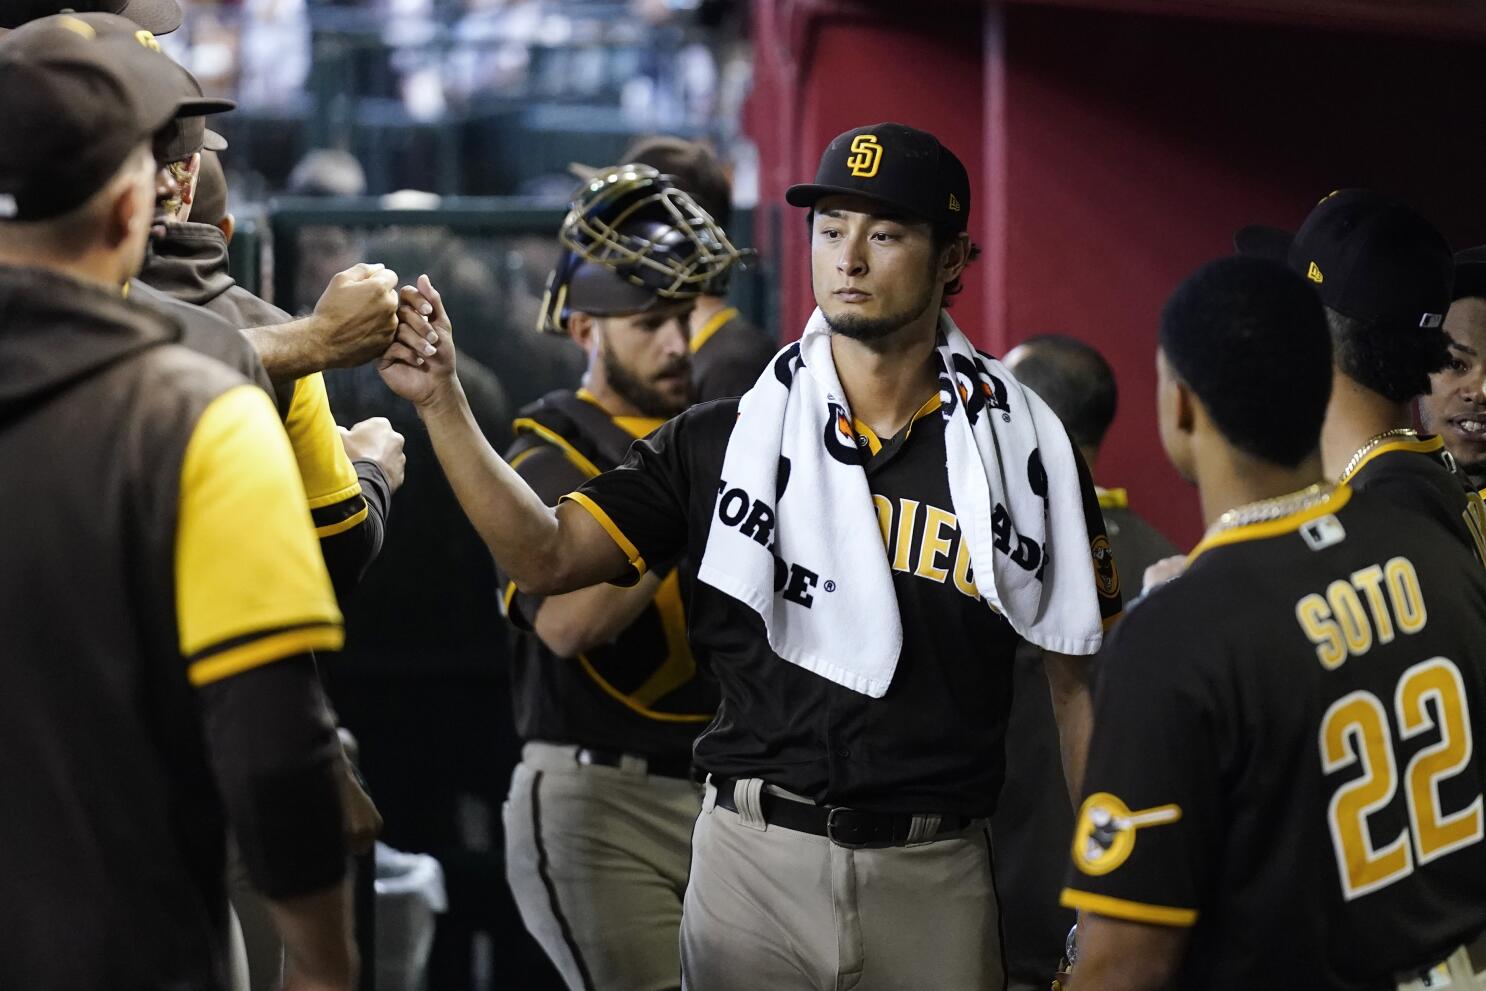 Padres notes: Yu Darvish appears lined up for another opening day